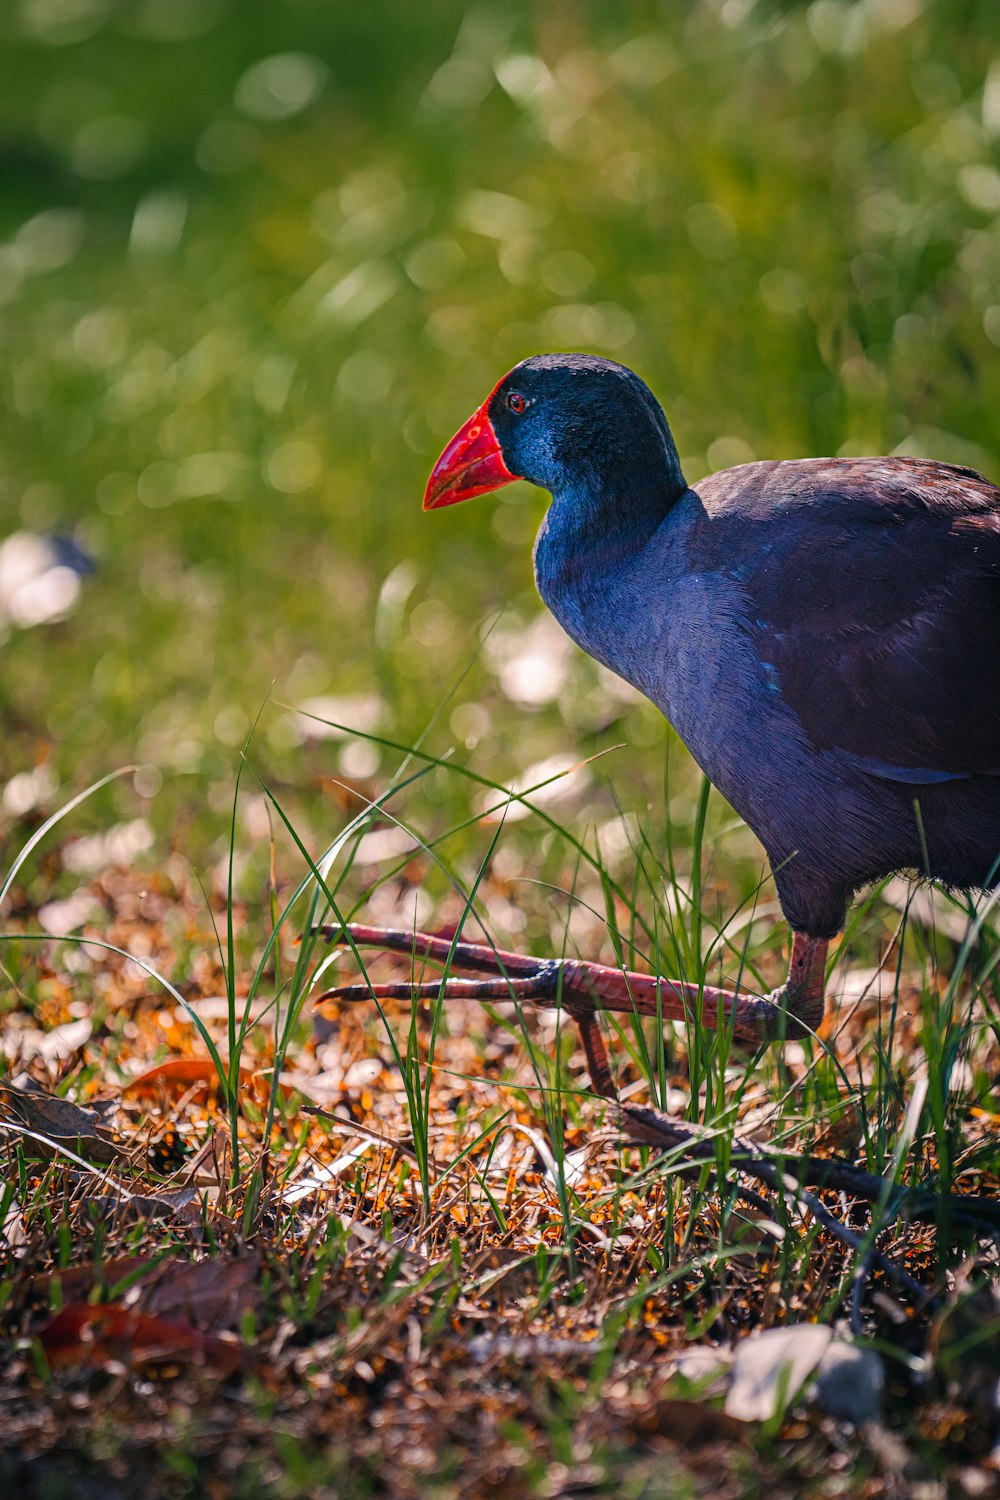 a blue bird with a red beak standing in the grass